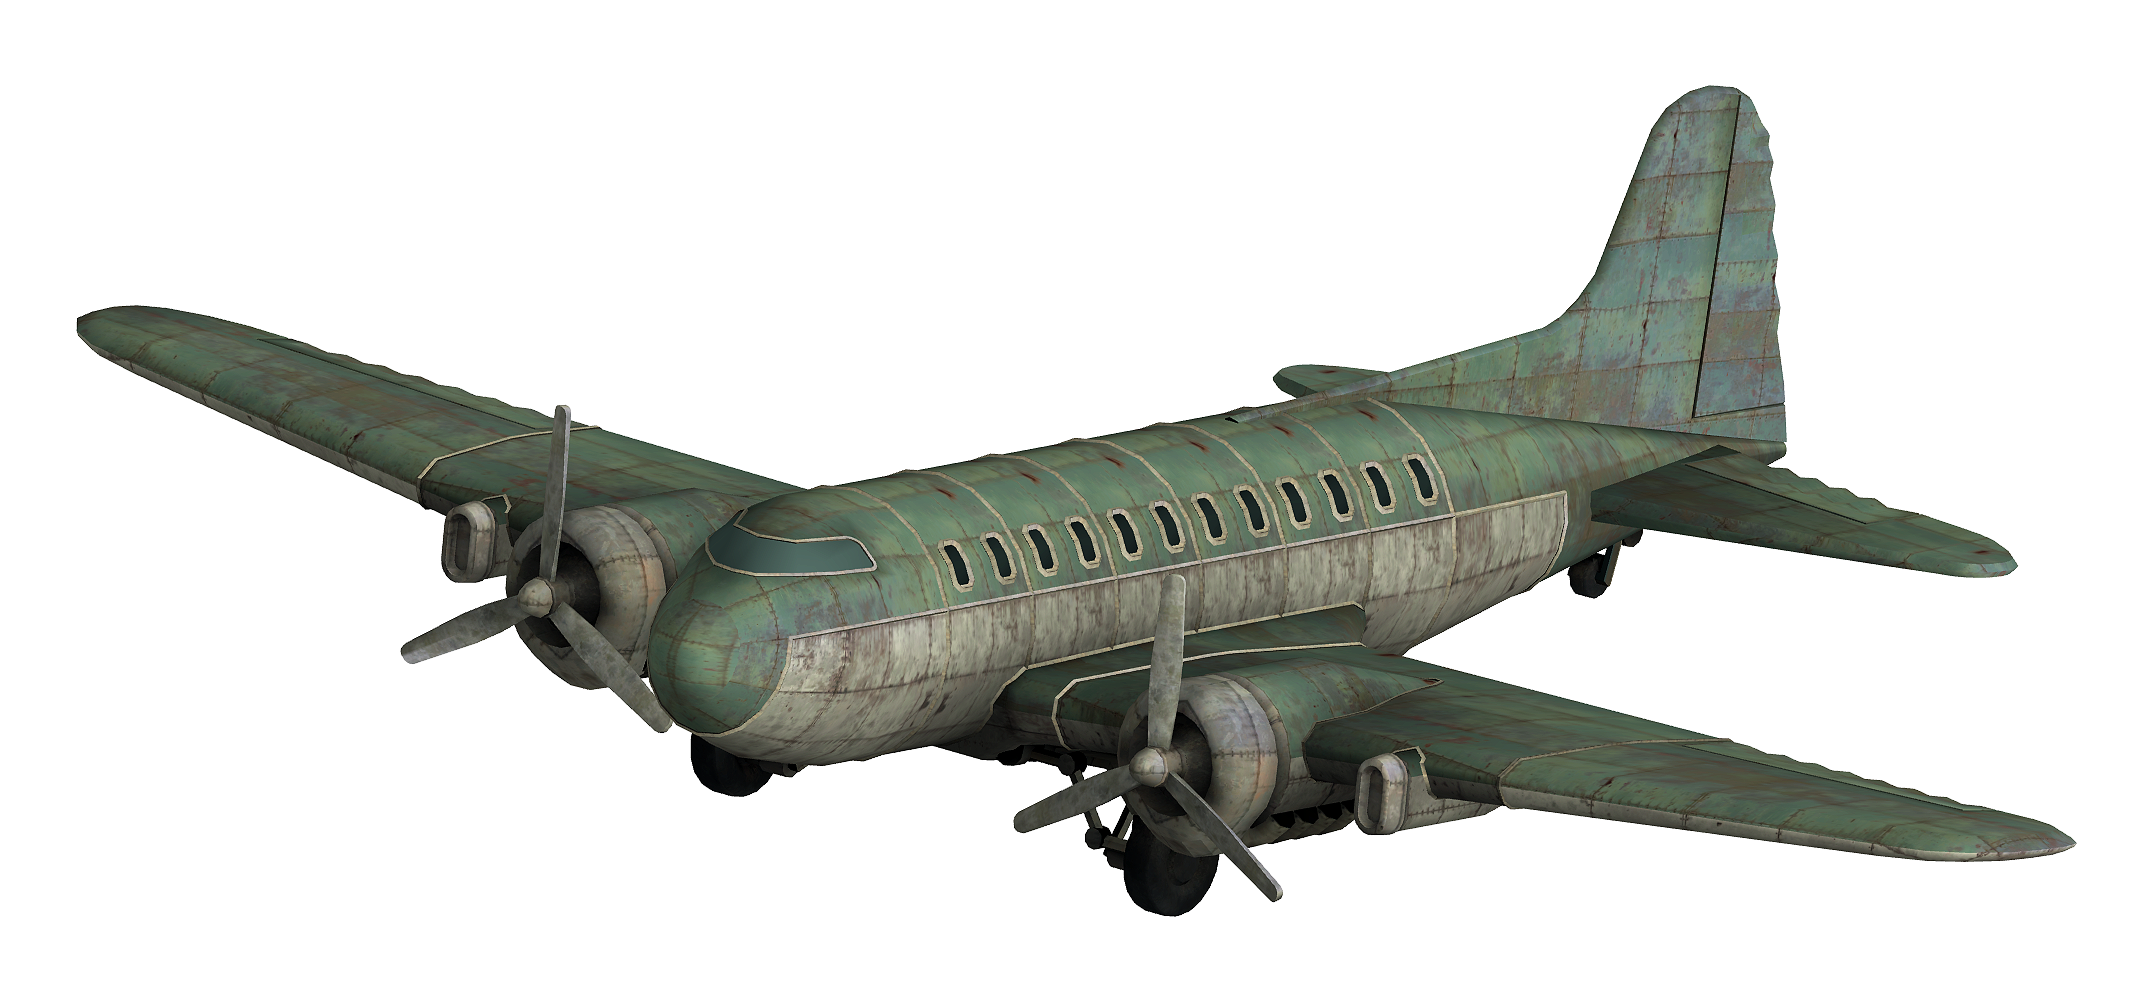 Transport plane - The Fallout wiki - Fallout: New Vegas and more